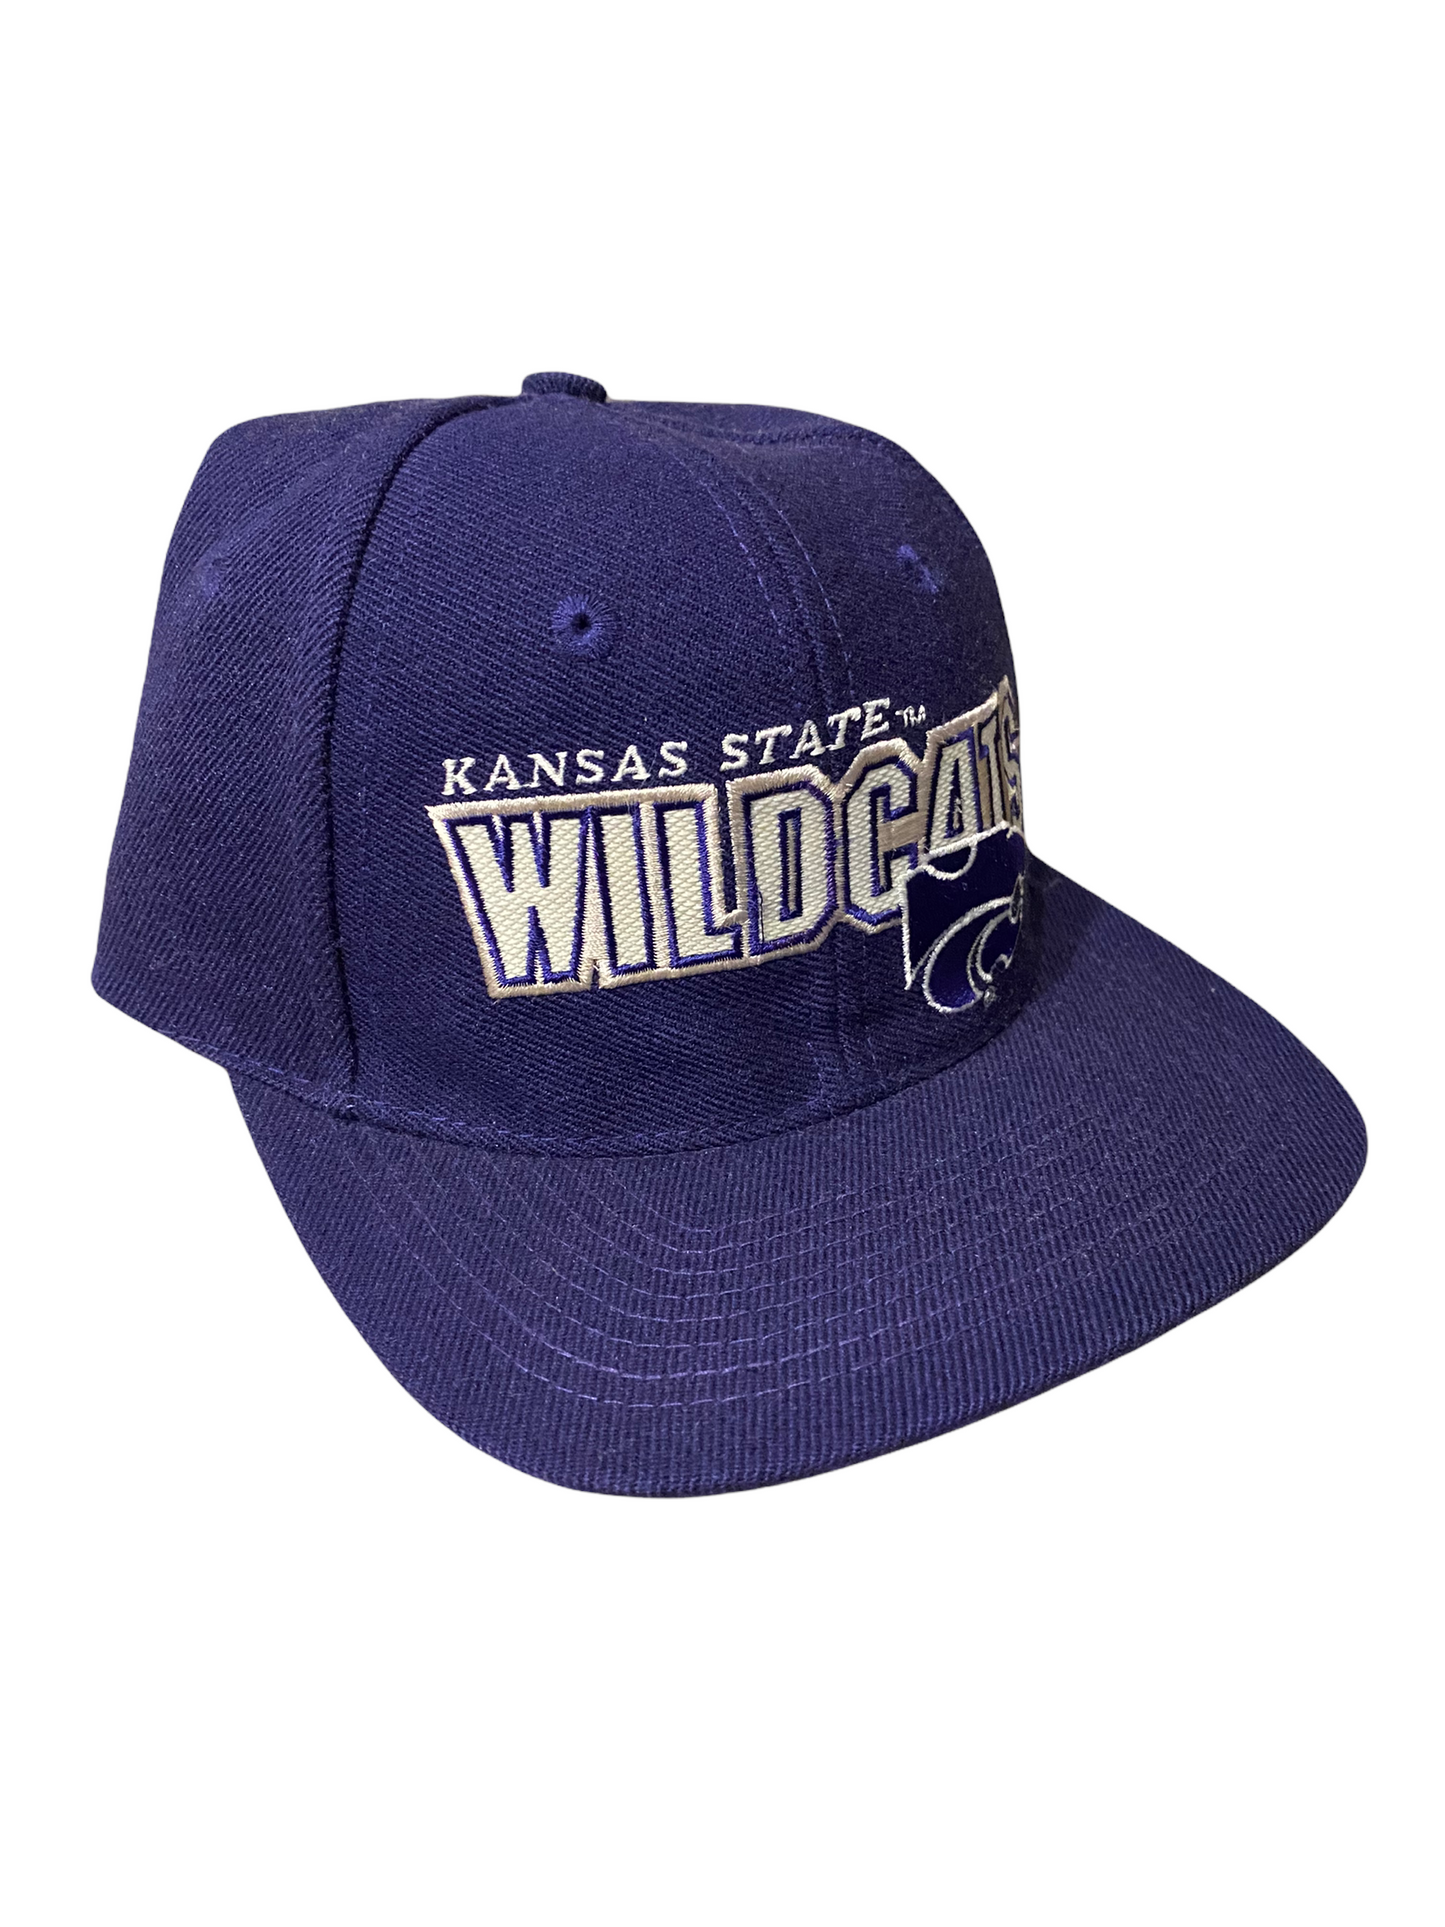 Vintage Kansas State Wildcats Hat New With Tags